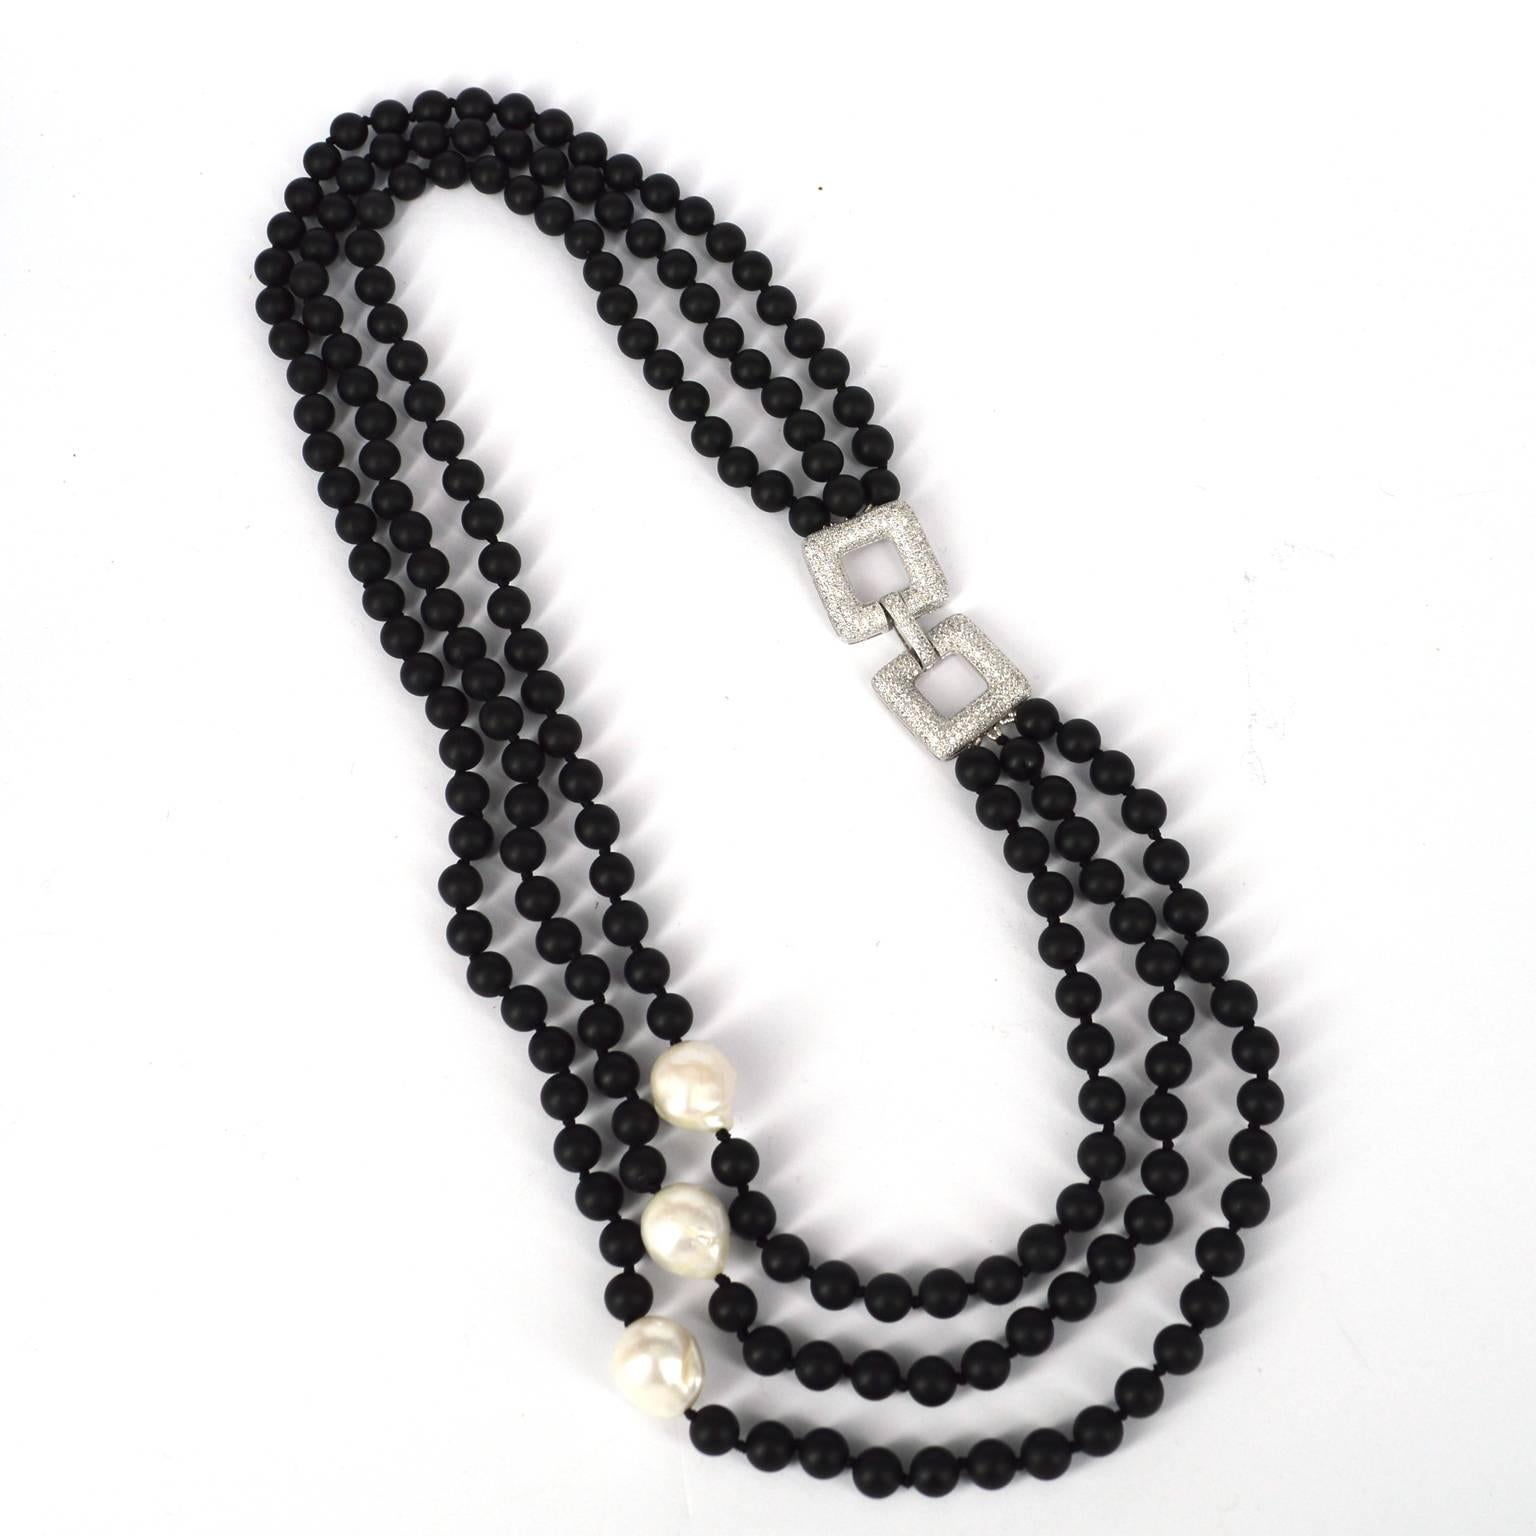 3 strands of 8mm matt onyx hand knotted on black thread with 3 baroque fresh water pearls approximately 17mm each.
Stunning Rhodium plated 925 CZ geometric clasp features on the other side of the necklace.
Shorter length is 60cm Longer length is